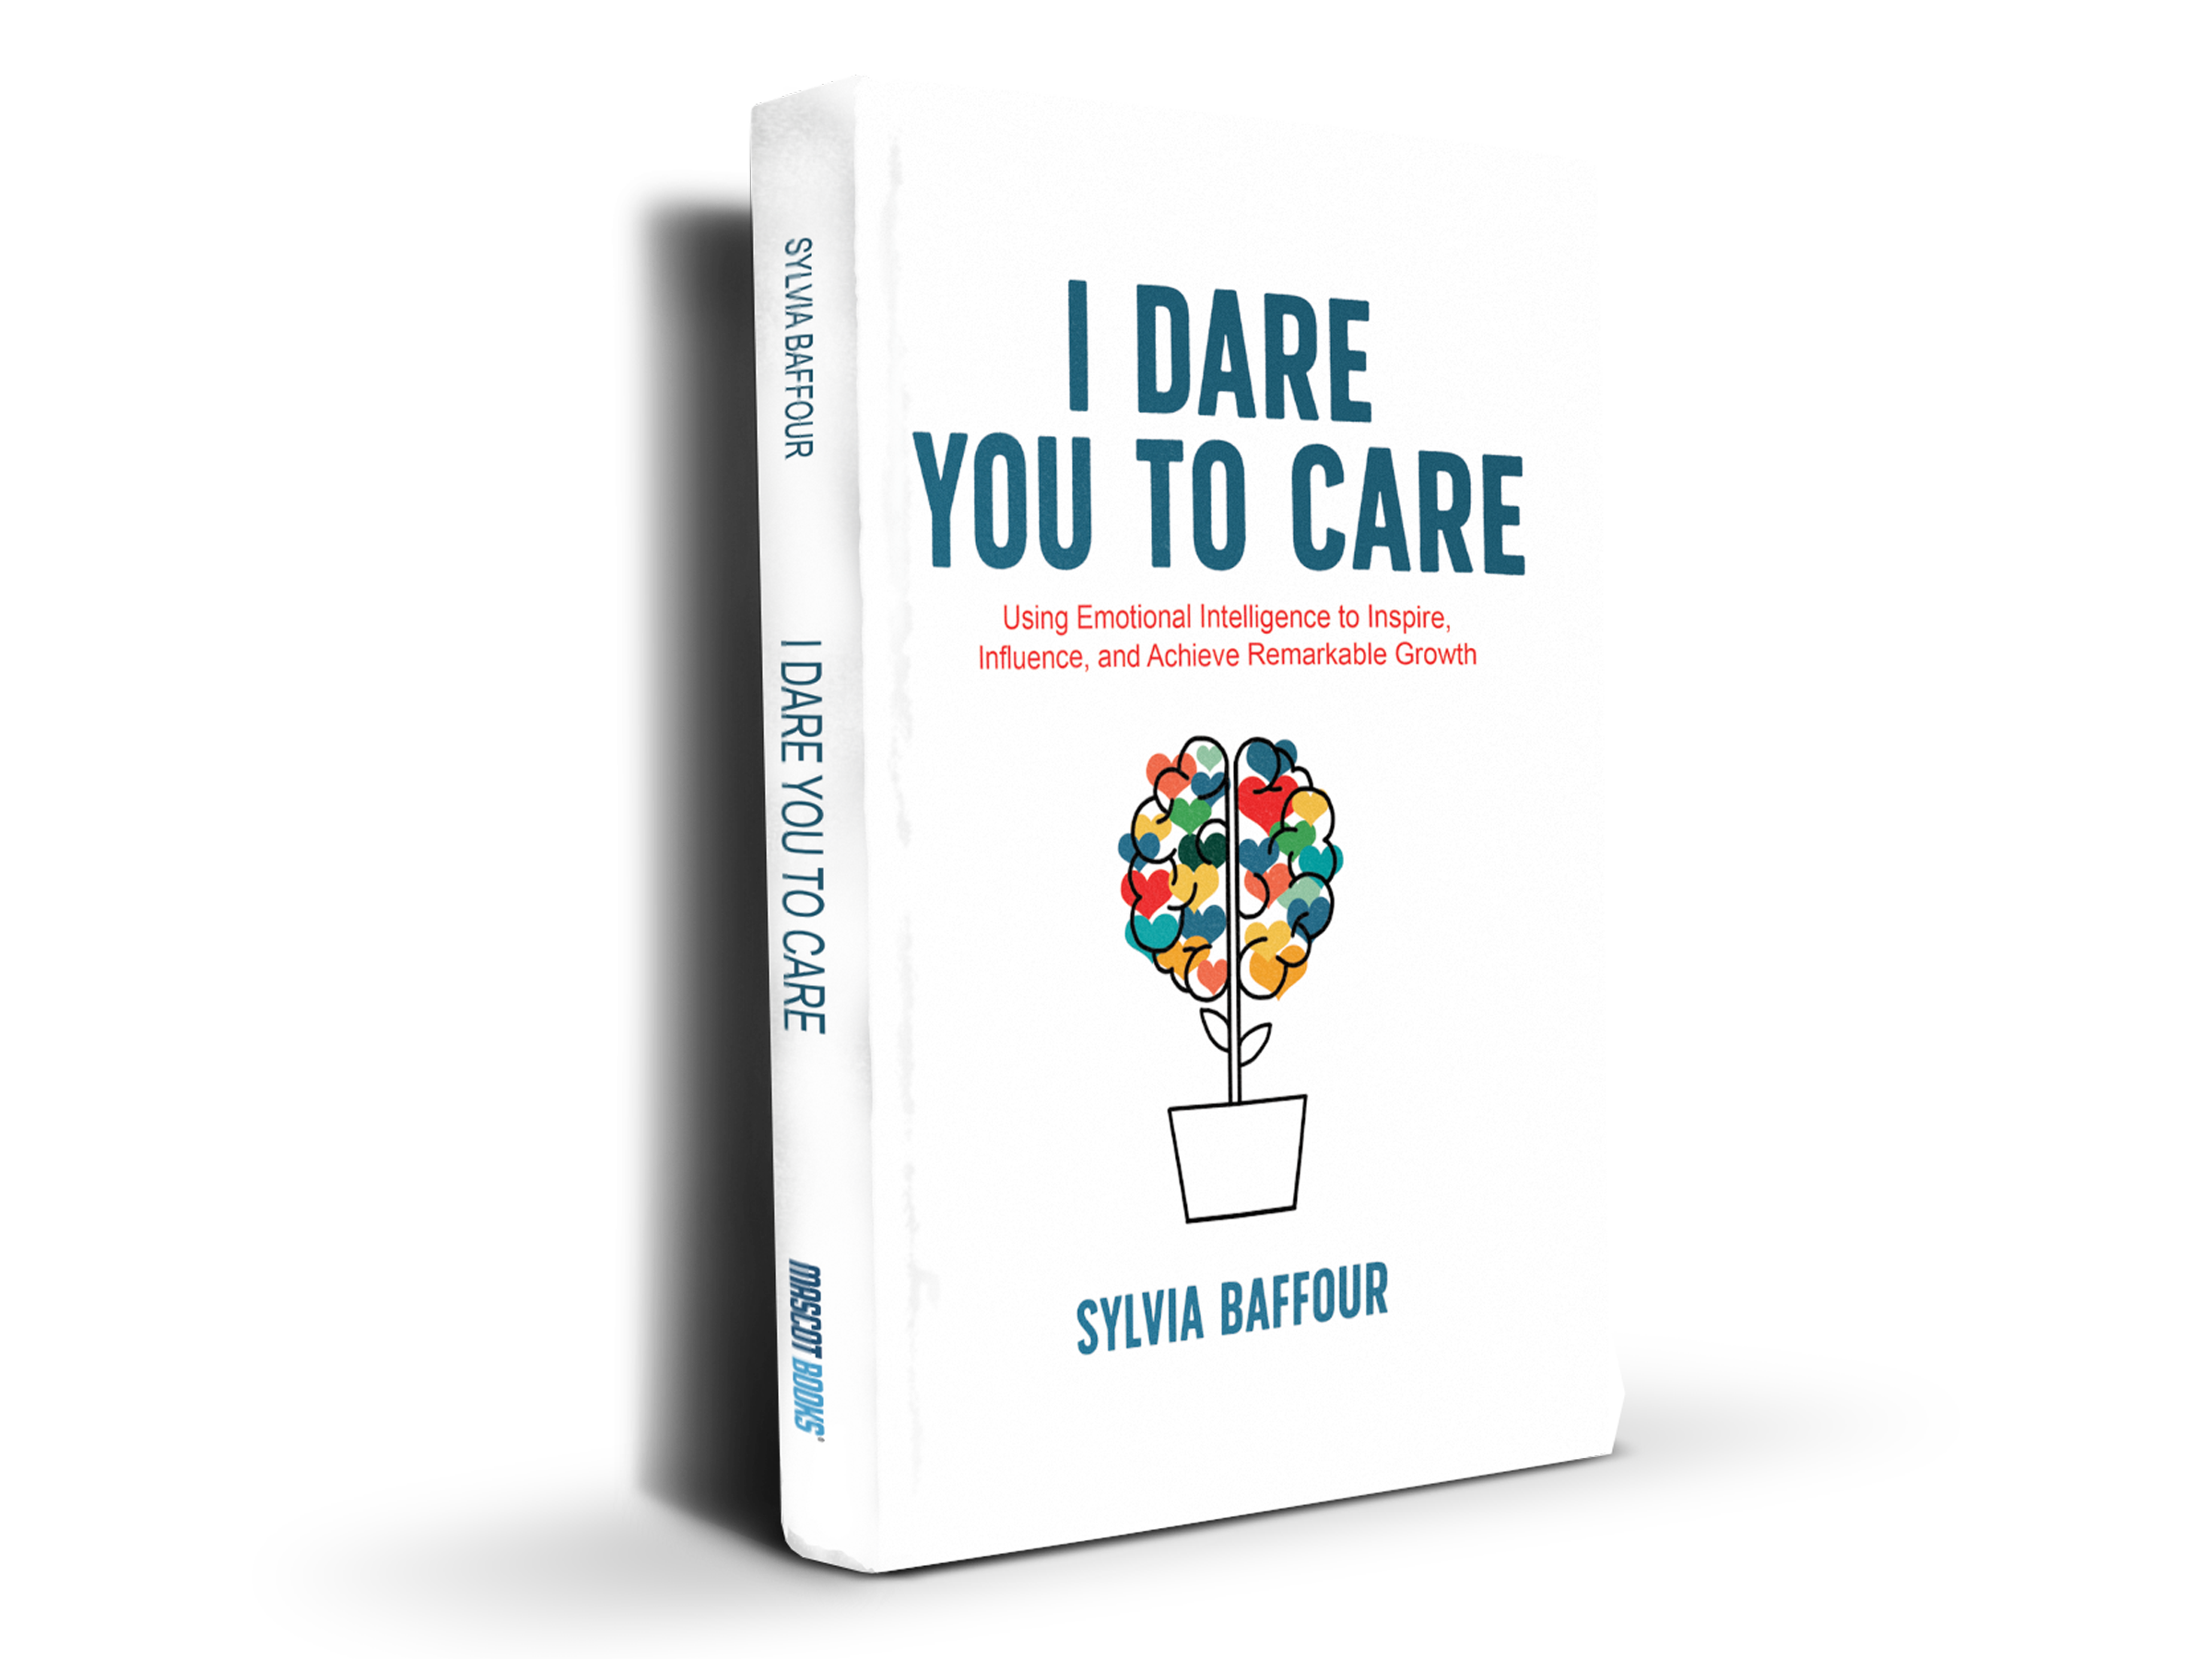 Final 3d model of cover i dare you to care: using emotional intelligence to inspire, influence, and achieve remarkable growth